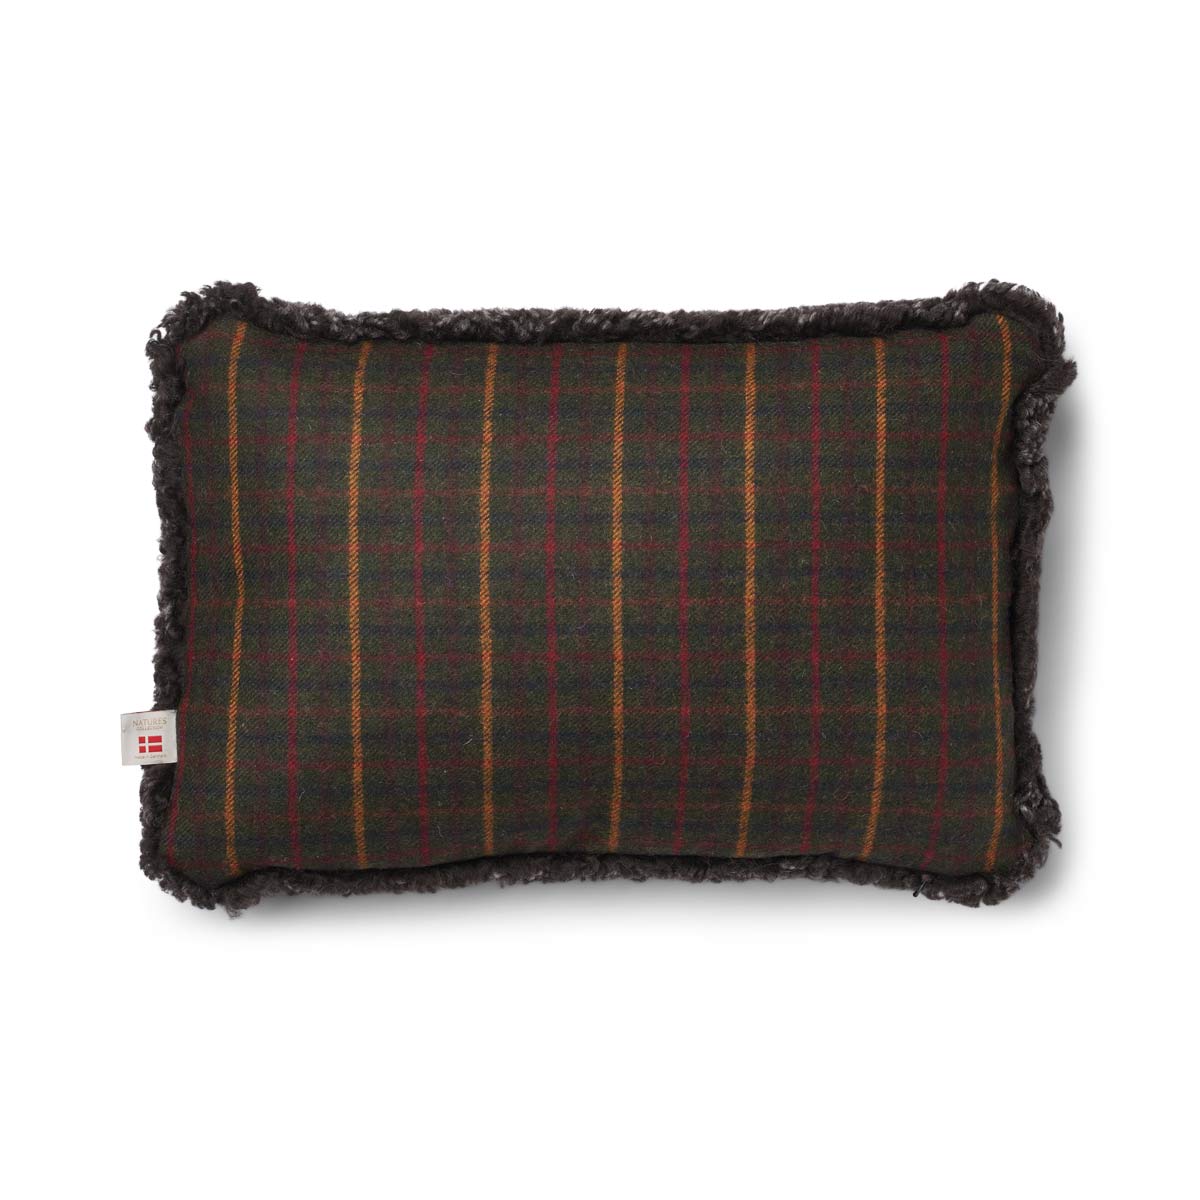 Checked Collection, Cushion One Side 100 % Wool, One Side SW New Zealand Sheepskin. Size: 34x52 cm.